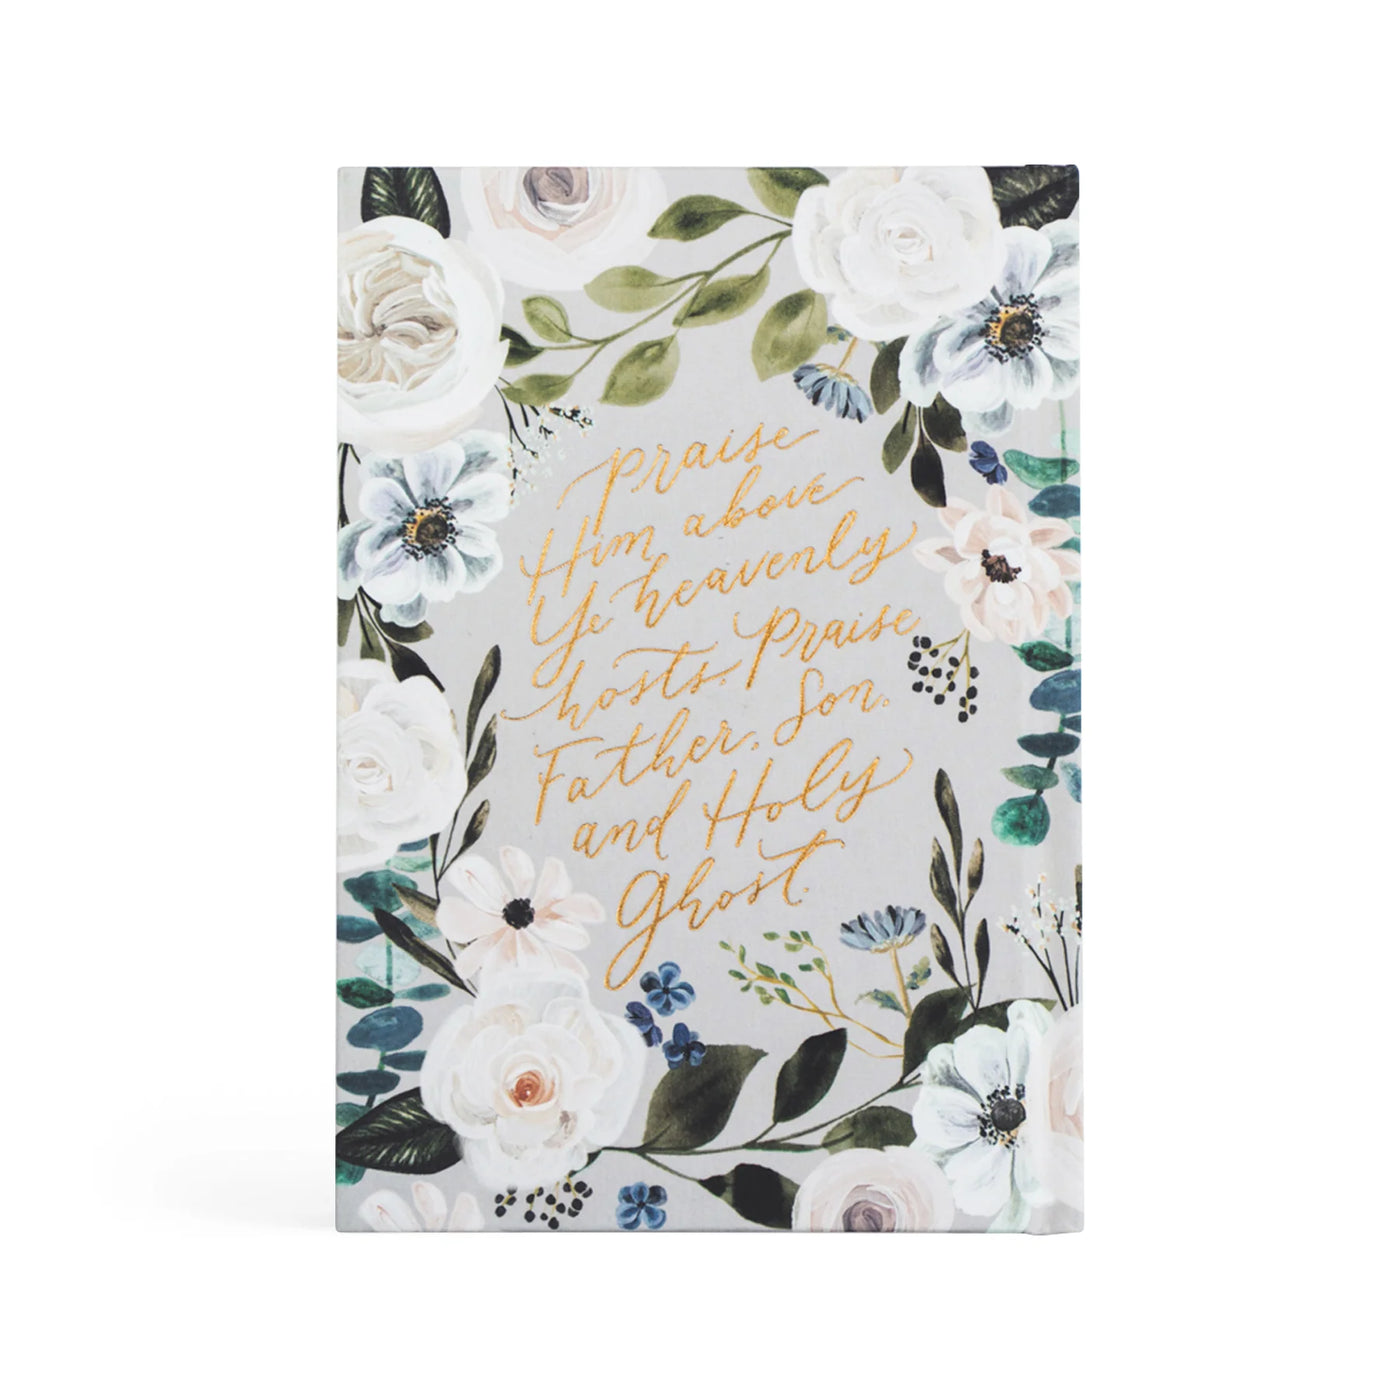 Hosanna Revival Notebook : Victoria Theme-402 MISC GIFTS-Hosanna Revival-Adelyn Elaine's Boutique, Women's Clothing Boutique in Gilmer, TX